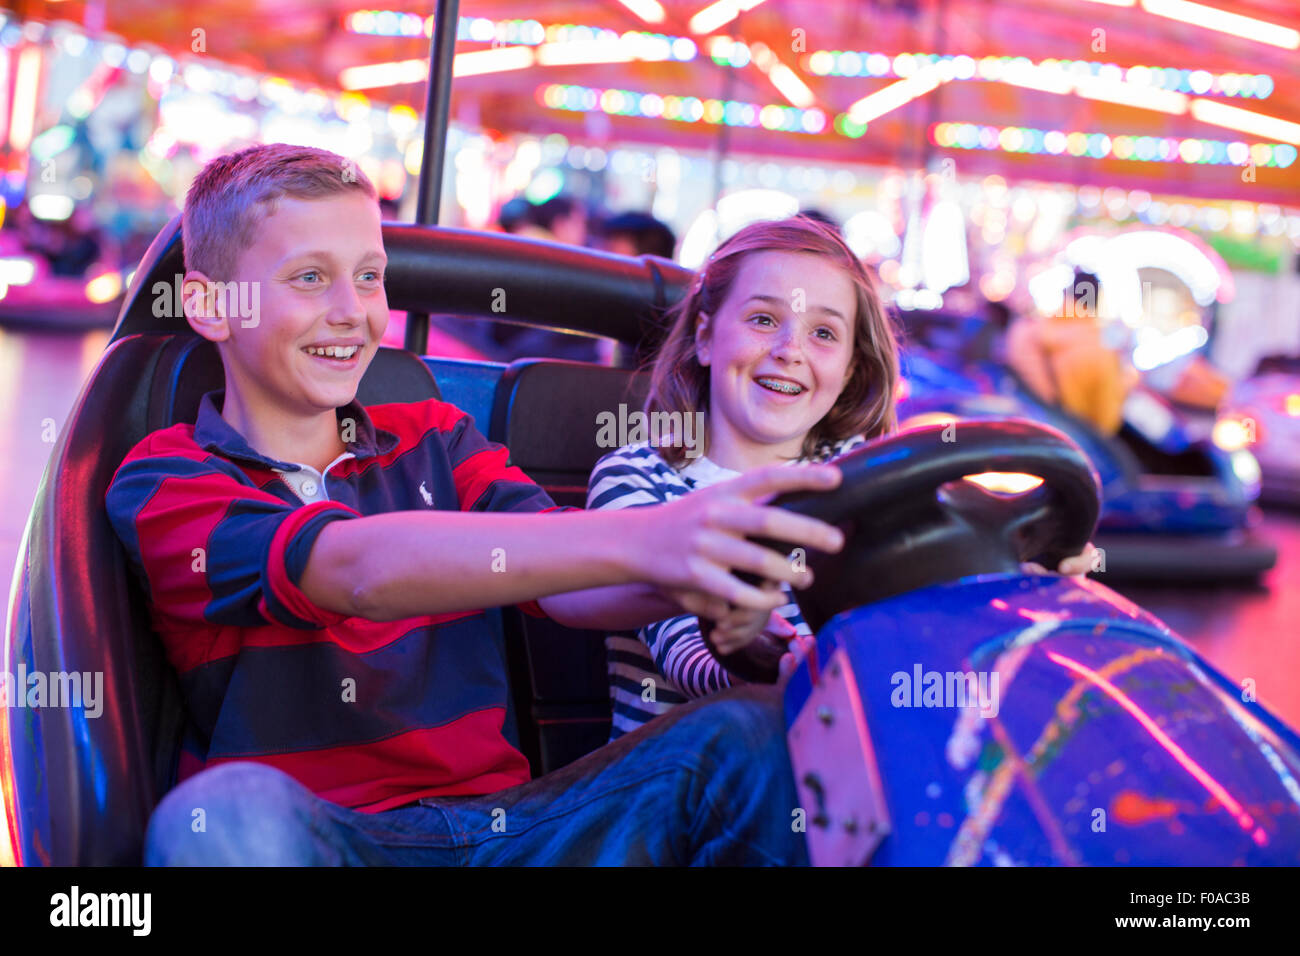 Brother and sister on fairground bumper cars Stock Photo